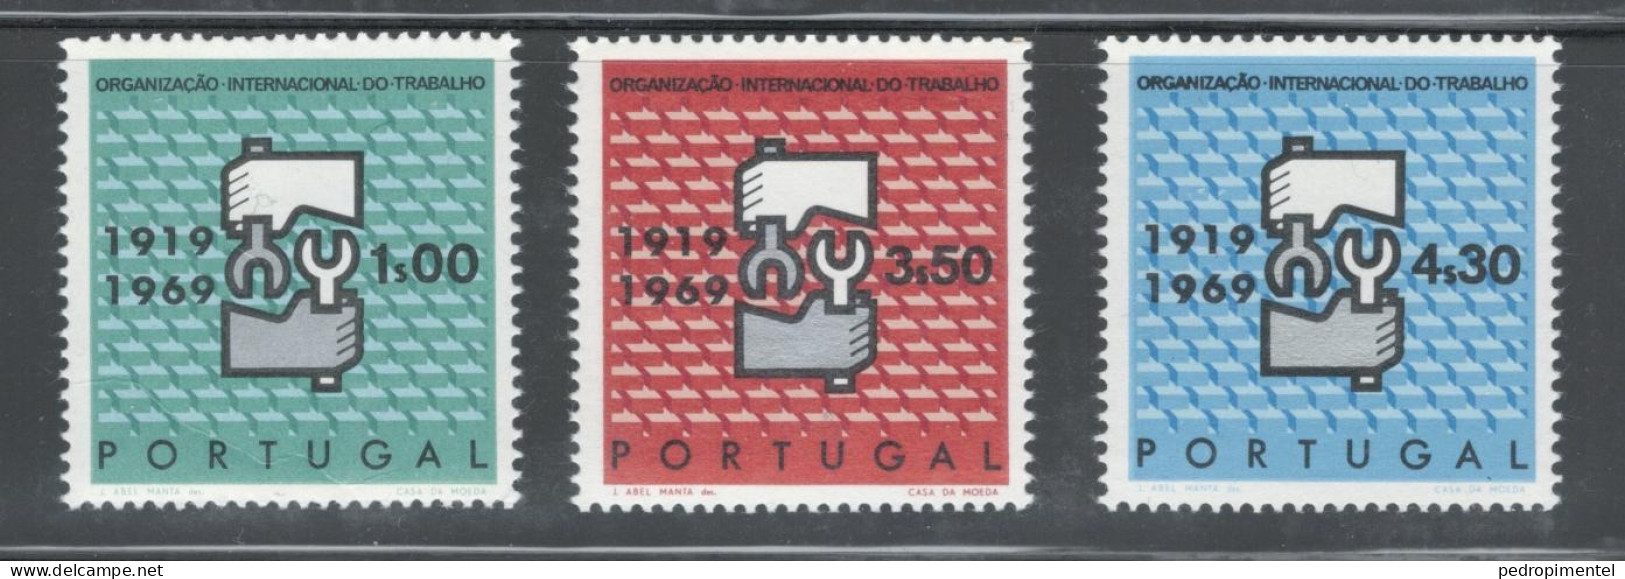 Portugal Stamps 1969 "OIT" Condition MNH #1047-1049 - Ungebraucht